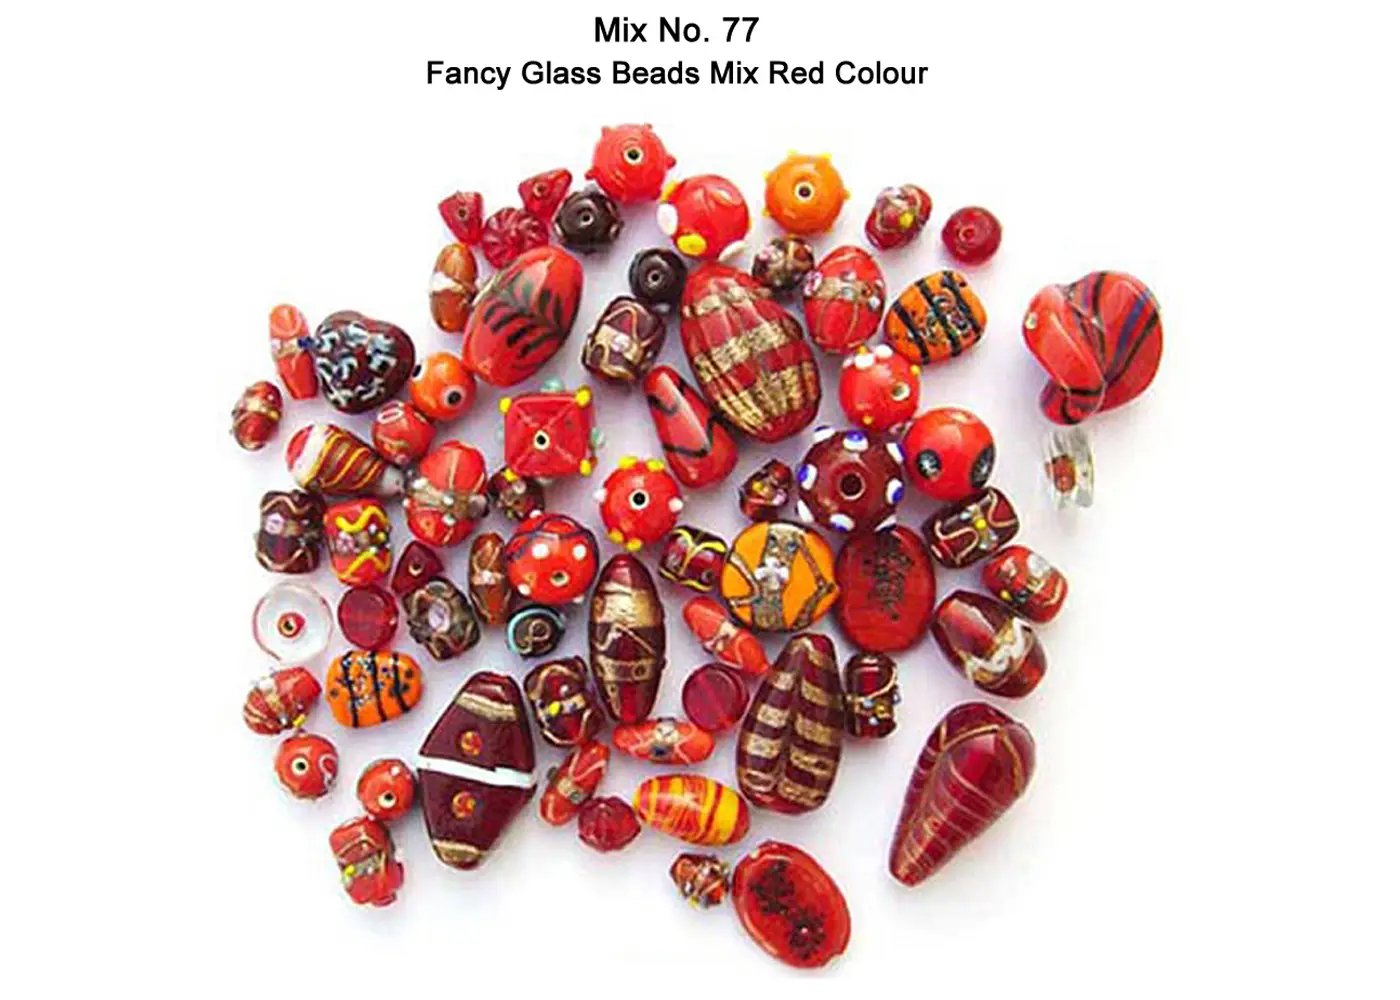 Fancy Glass Beads in Red color